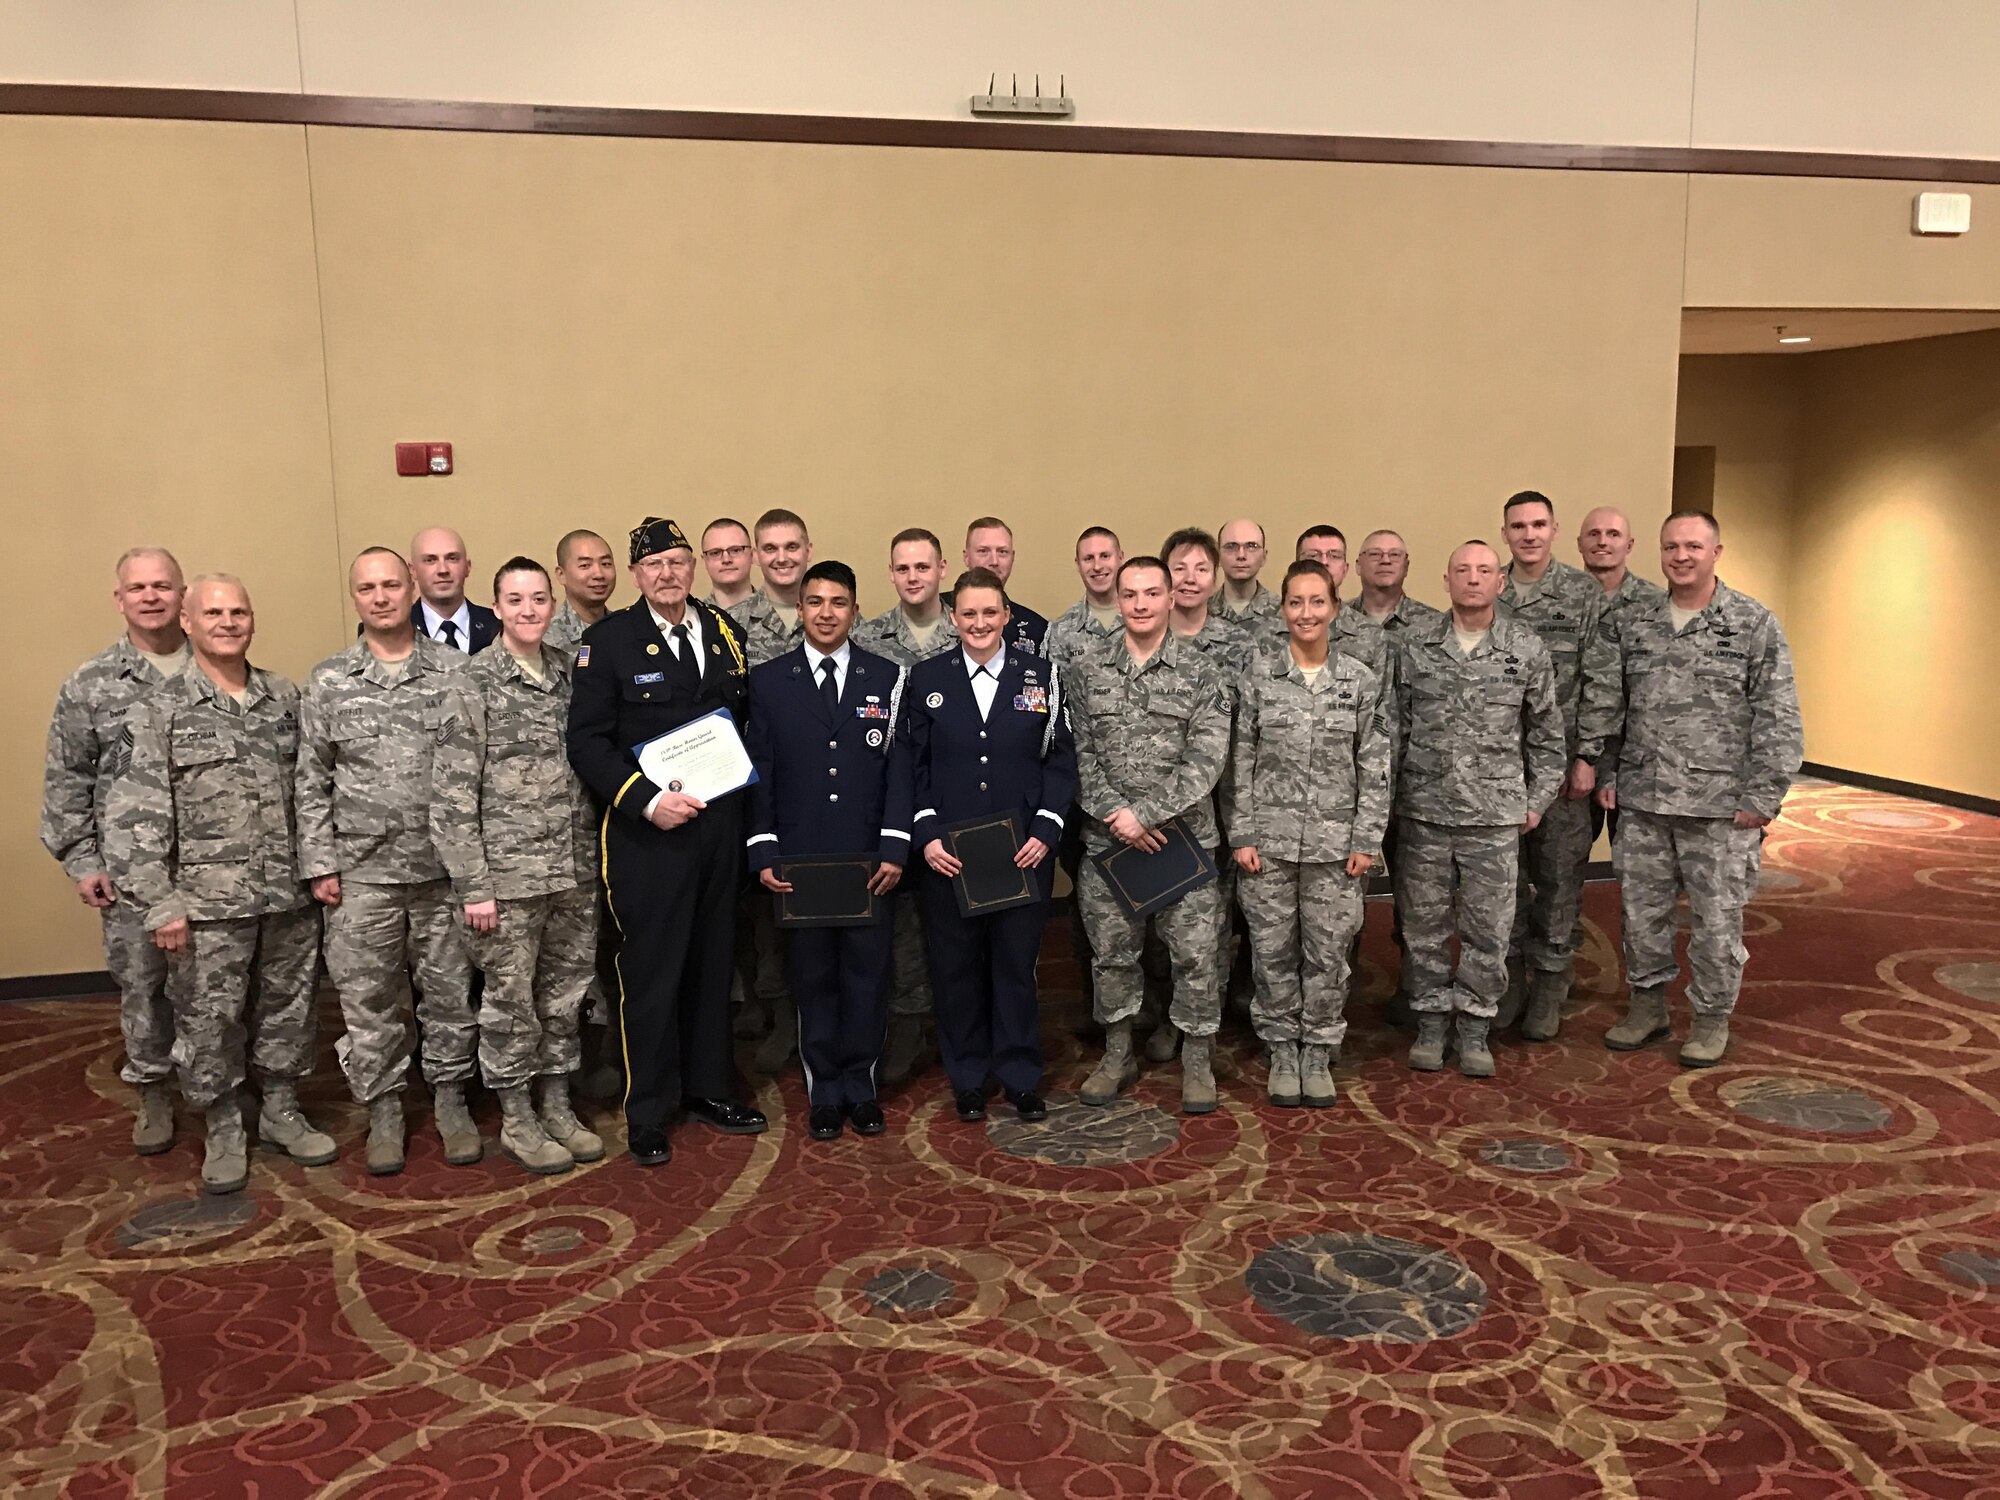 Members of the 185th Air Refueling Wing in Sioux City, Iowa were recognized for their efforts over the past year at an awards ceremony during February drill. Also present was Mr. Gerald Pallesen with the VFW who has sounded Taps at numerous funerals along side the 185th Honor Guard. (Official U.S.Air National Guard photo by Lt. Trish Thiesen/Released)